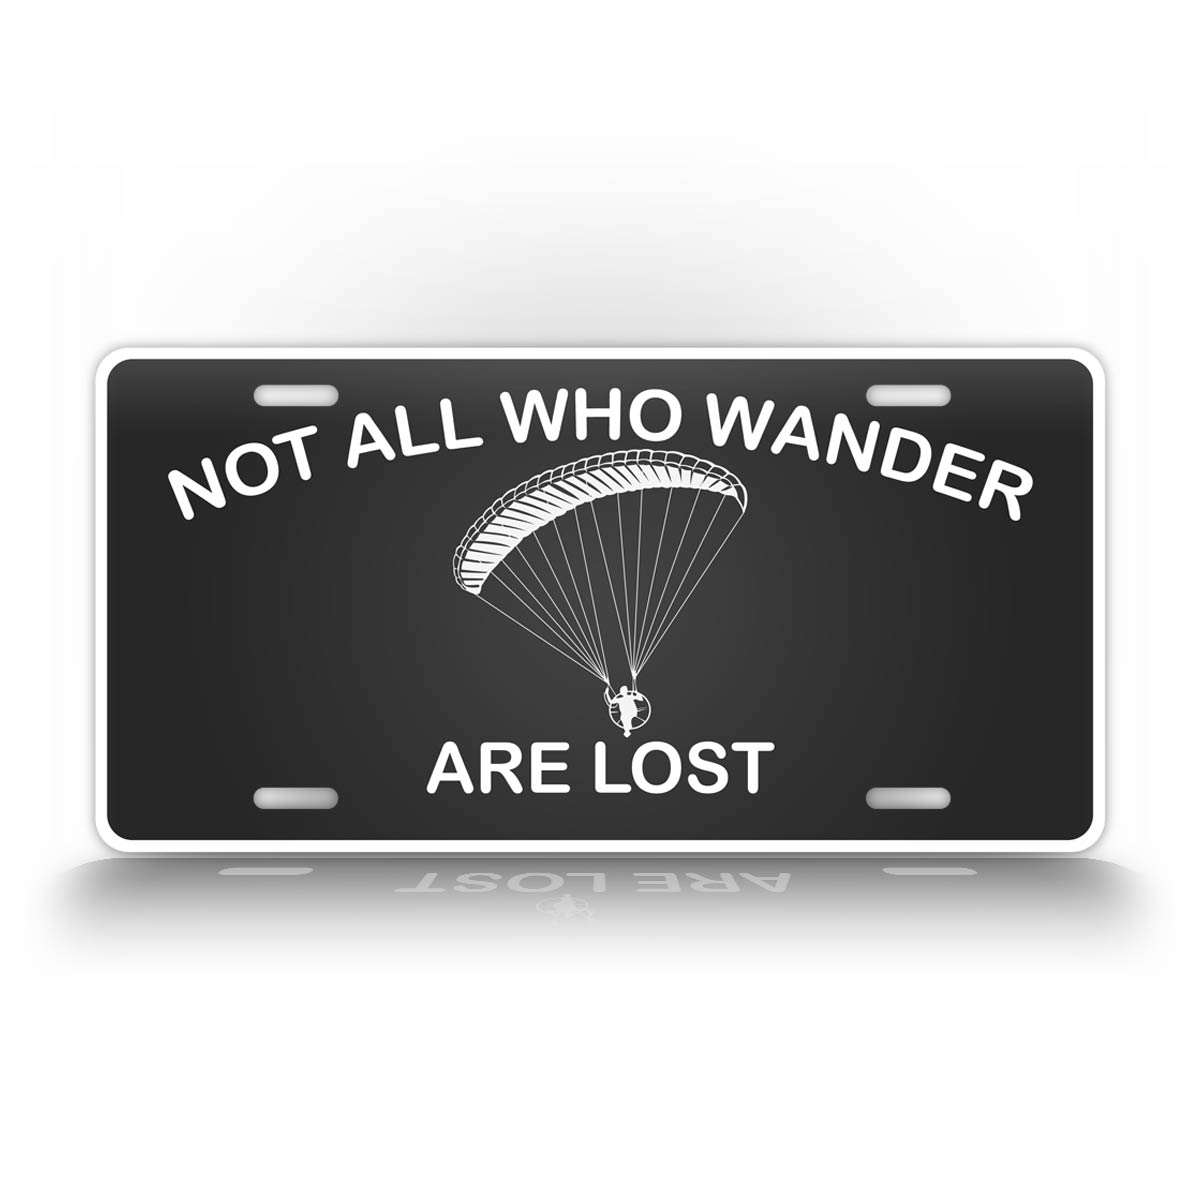 Not All Who Wander Are Lost Para Motor License Plate 